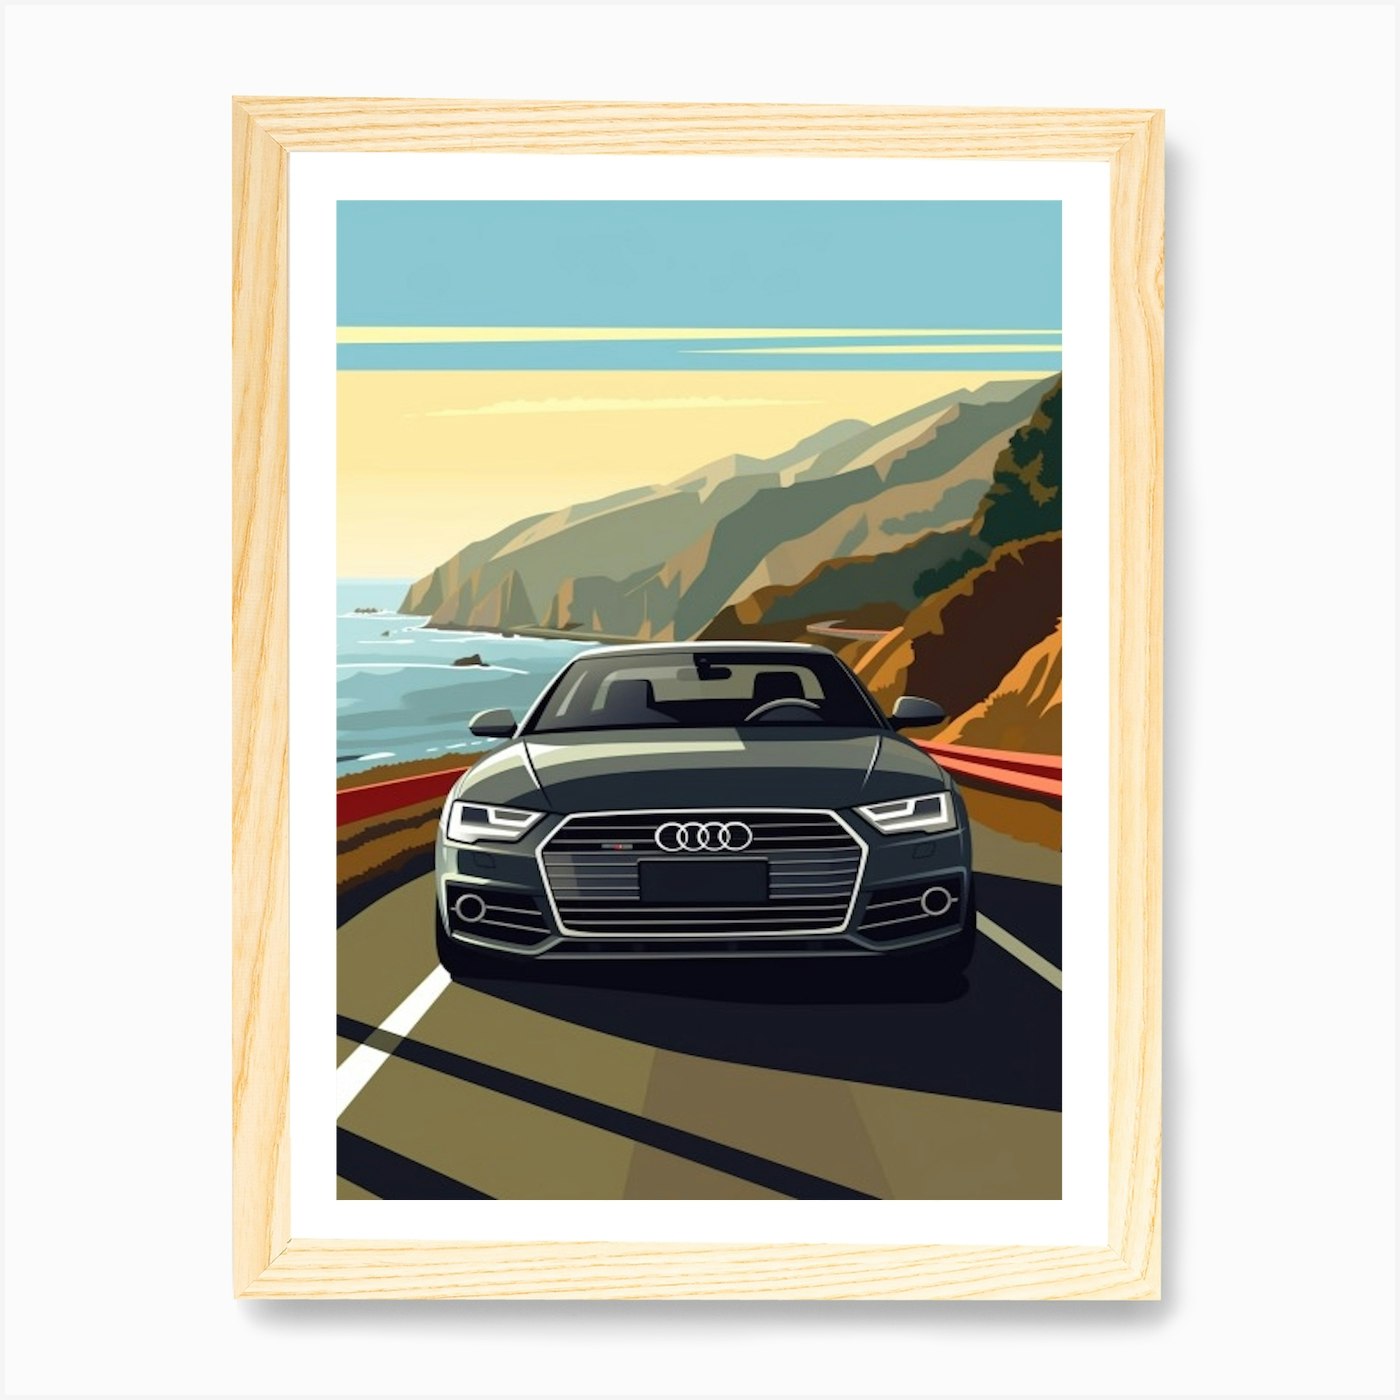 A Audi A4 Car In Icefields Parkway Flat Illustration 4 Art Print by  RetroRides Gallery - Fy